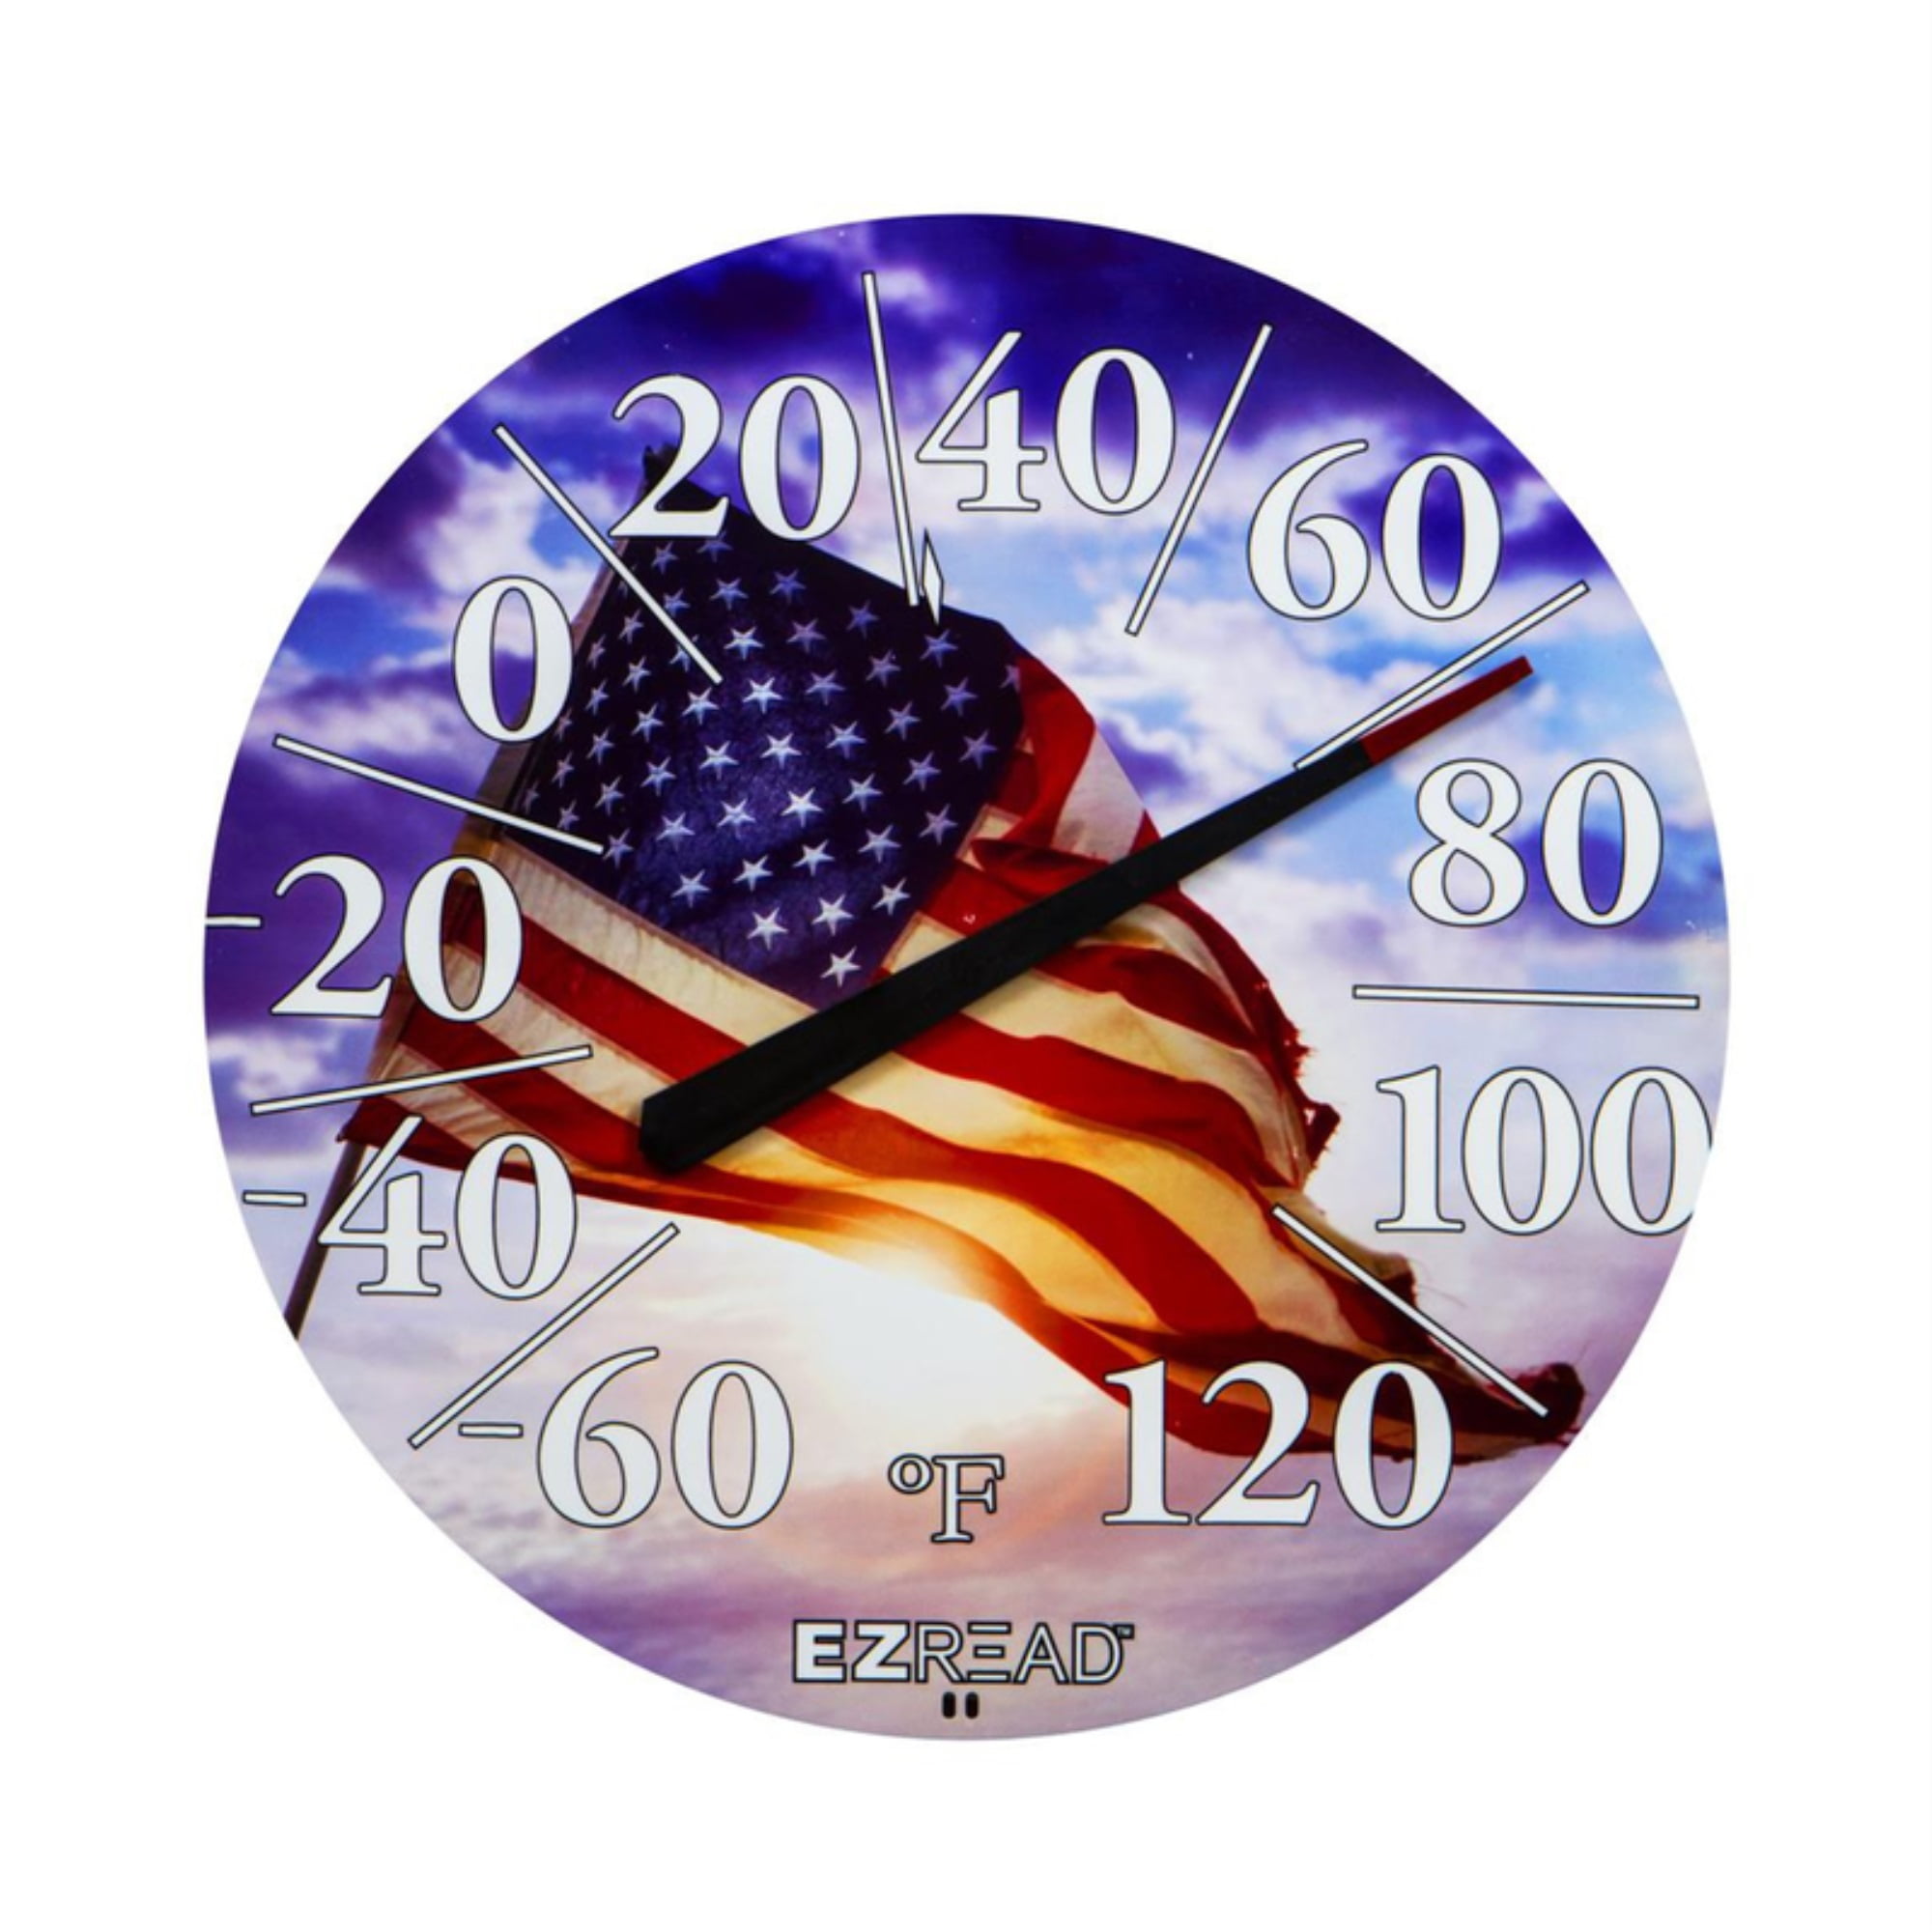 034023 Ezread Dial Thermometer American Flag